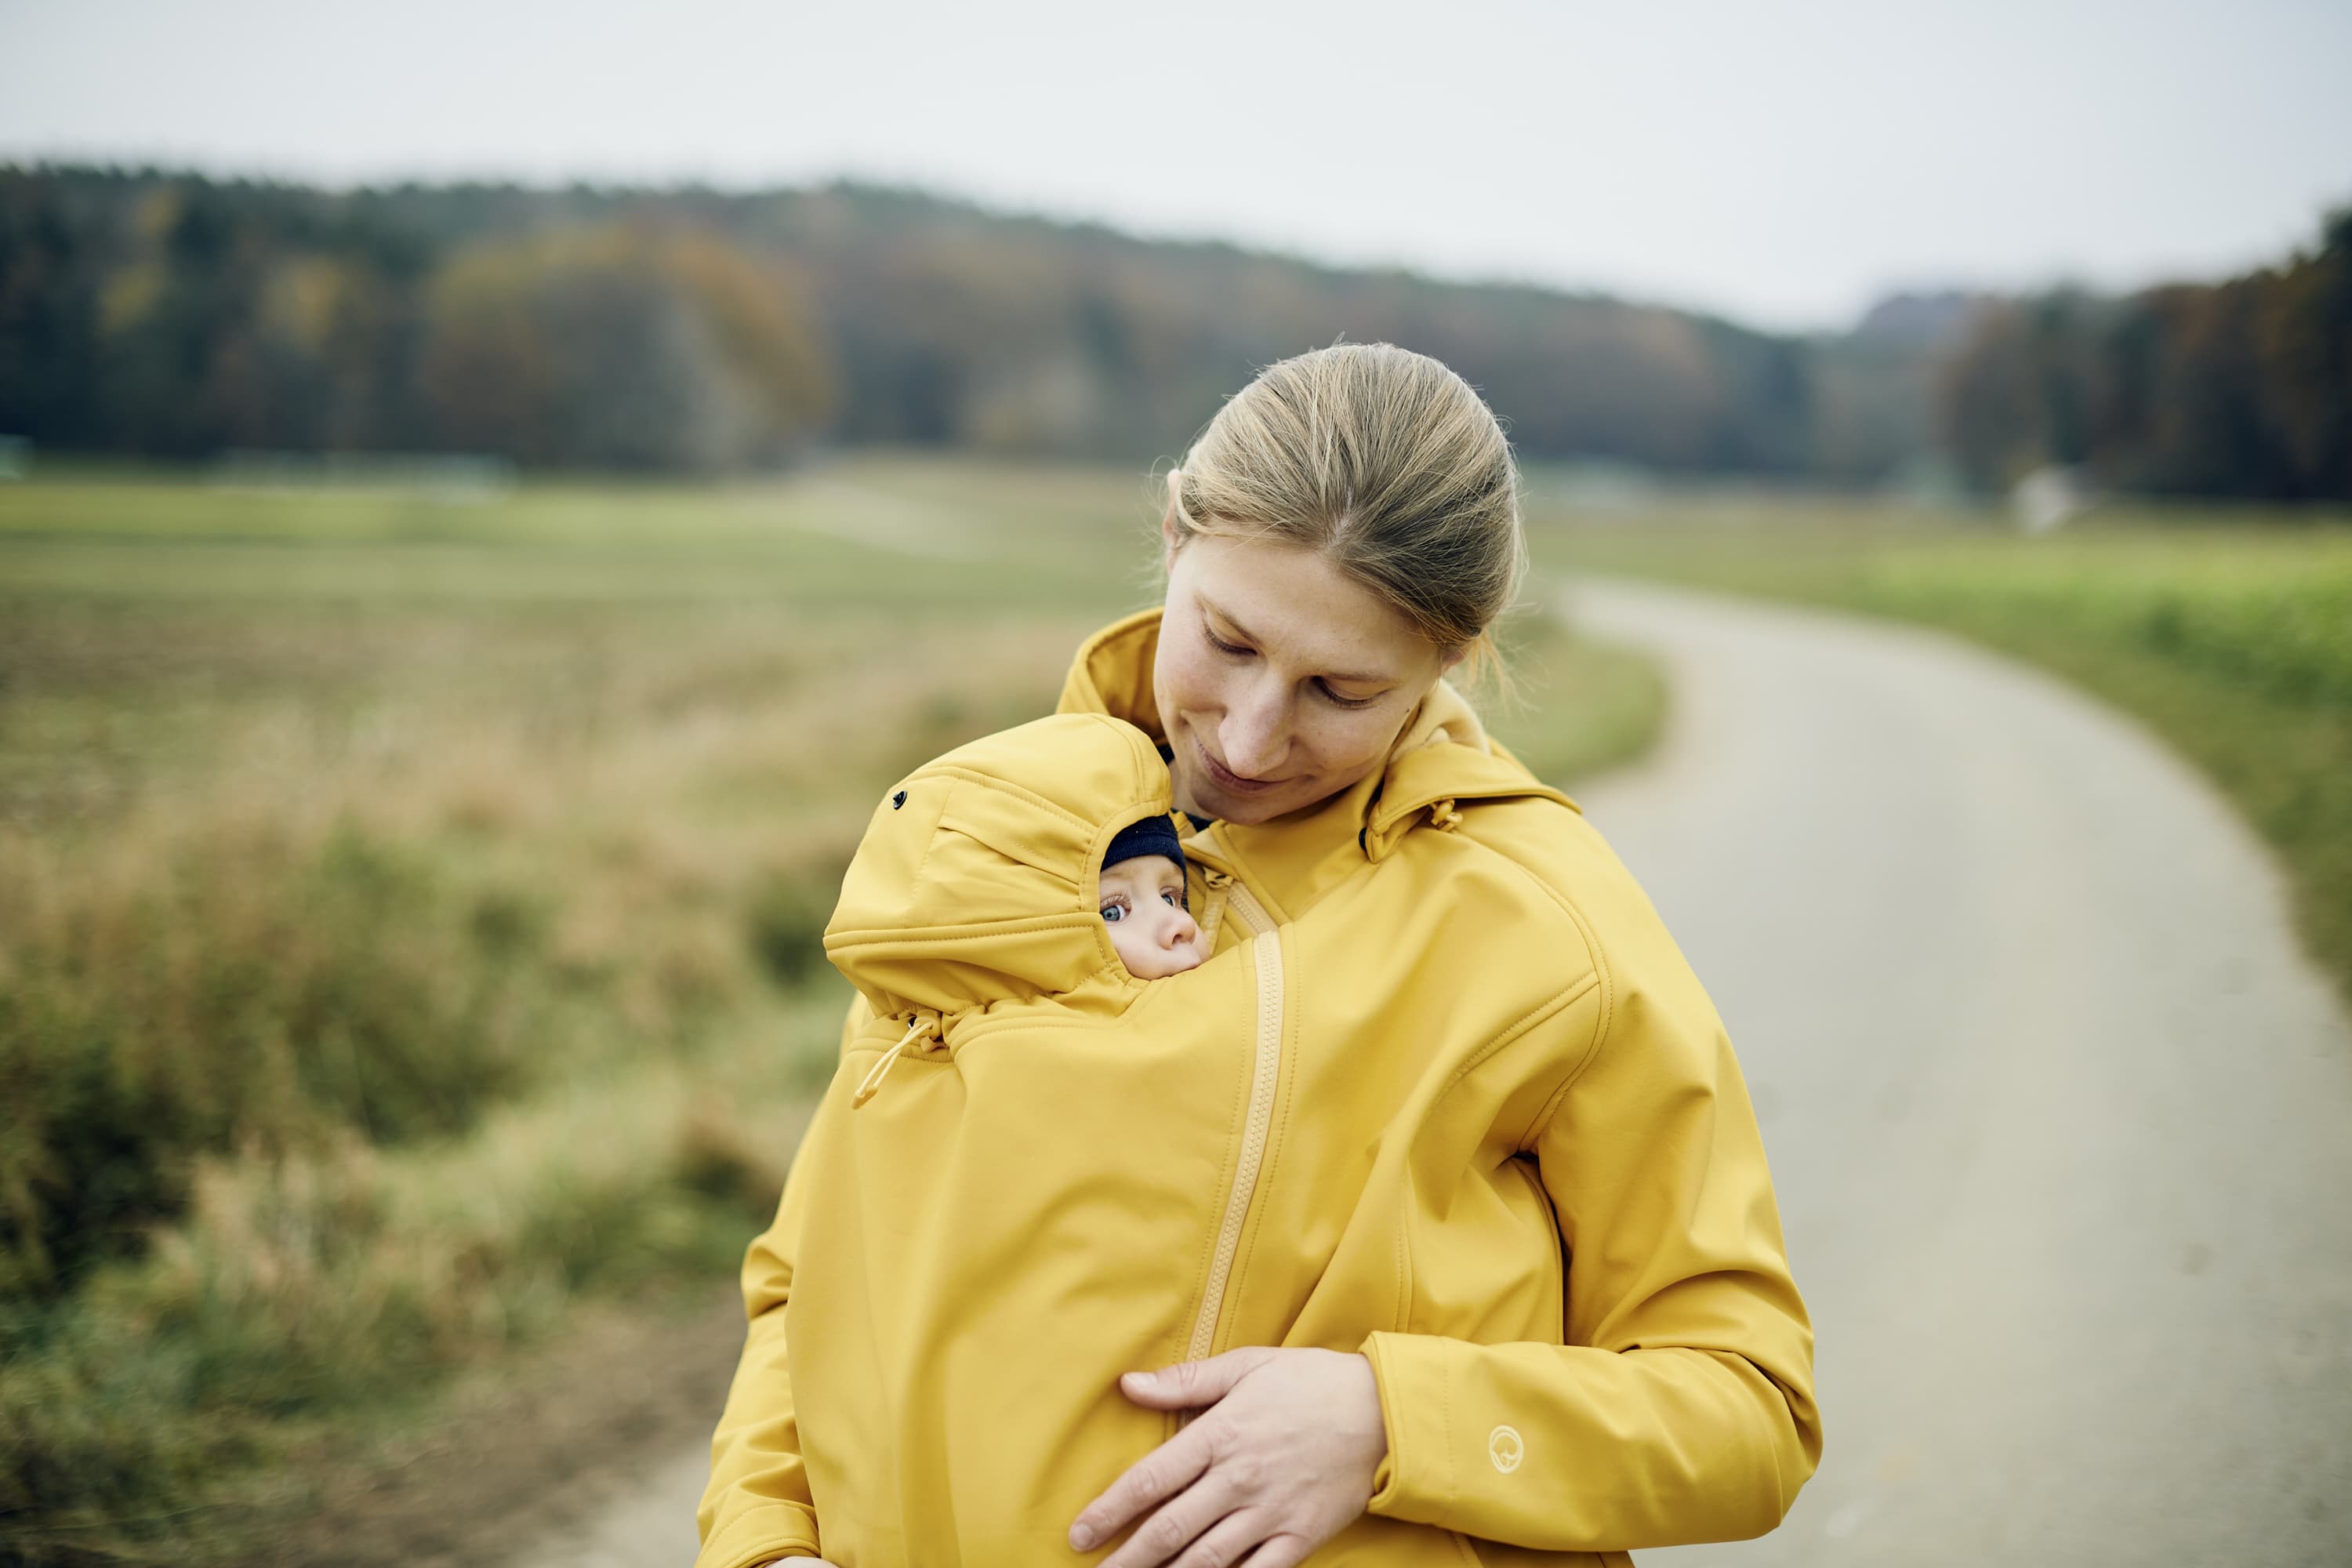 A woman with blonde hair tied back in a pony tail standing outside looking down lovingly at her baby wearing the Mamalila Allrounder Babywearing Jacket in Mustard with her baby in the babywearing insert.